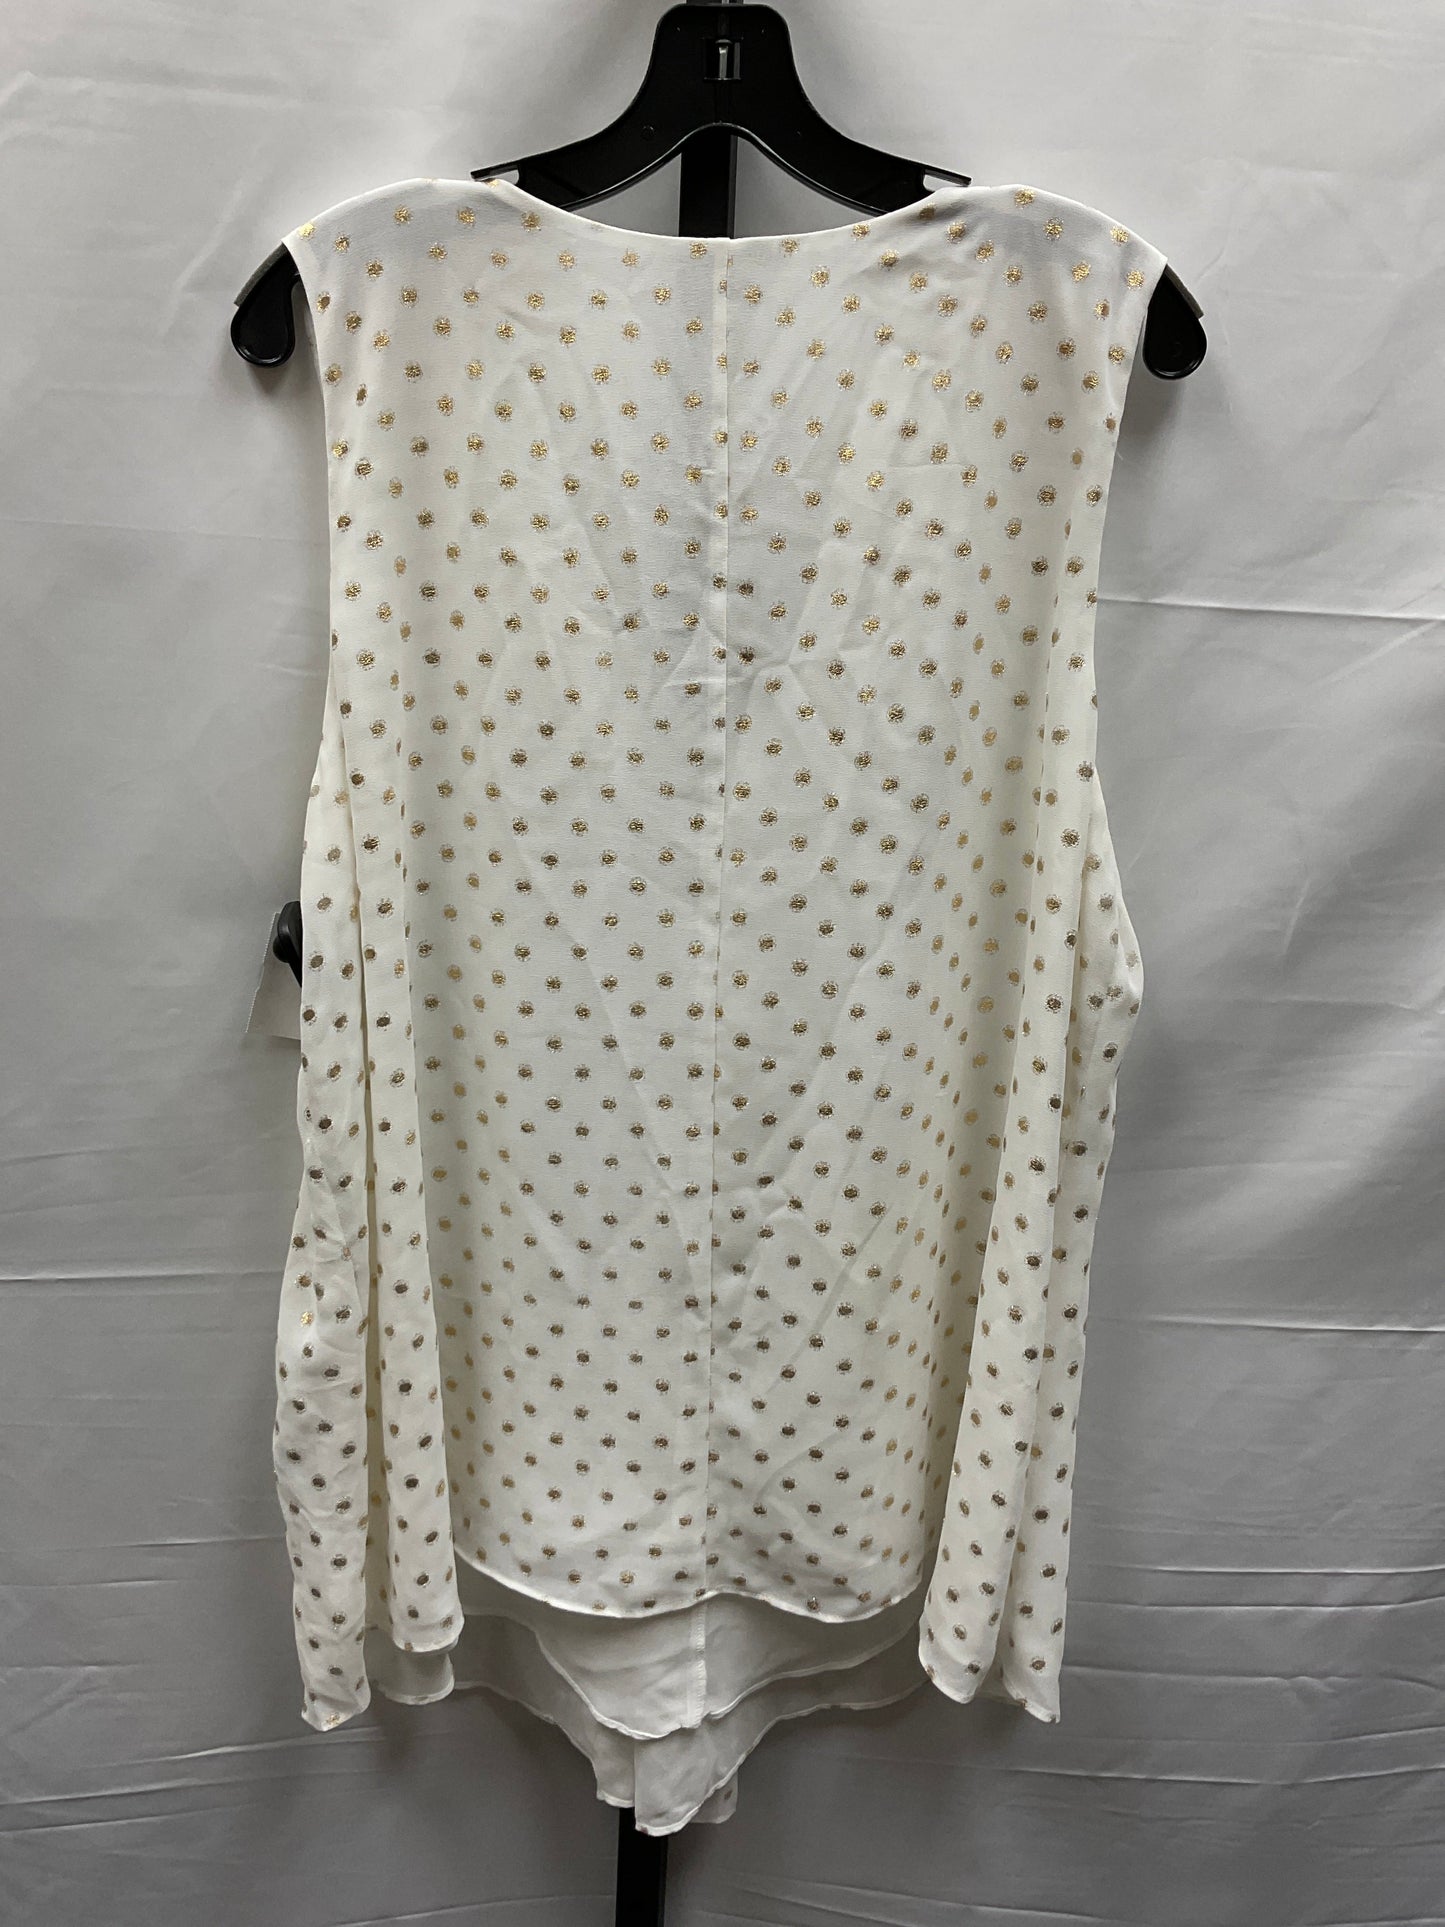 Gold & White Top Sleeveless Roz And Ali, Size 1x